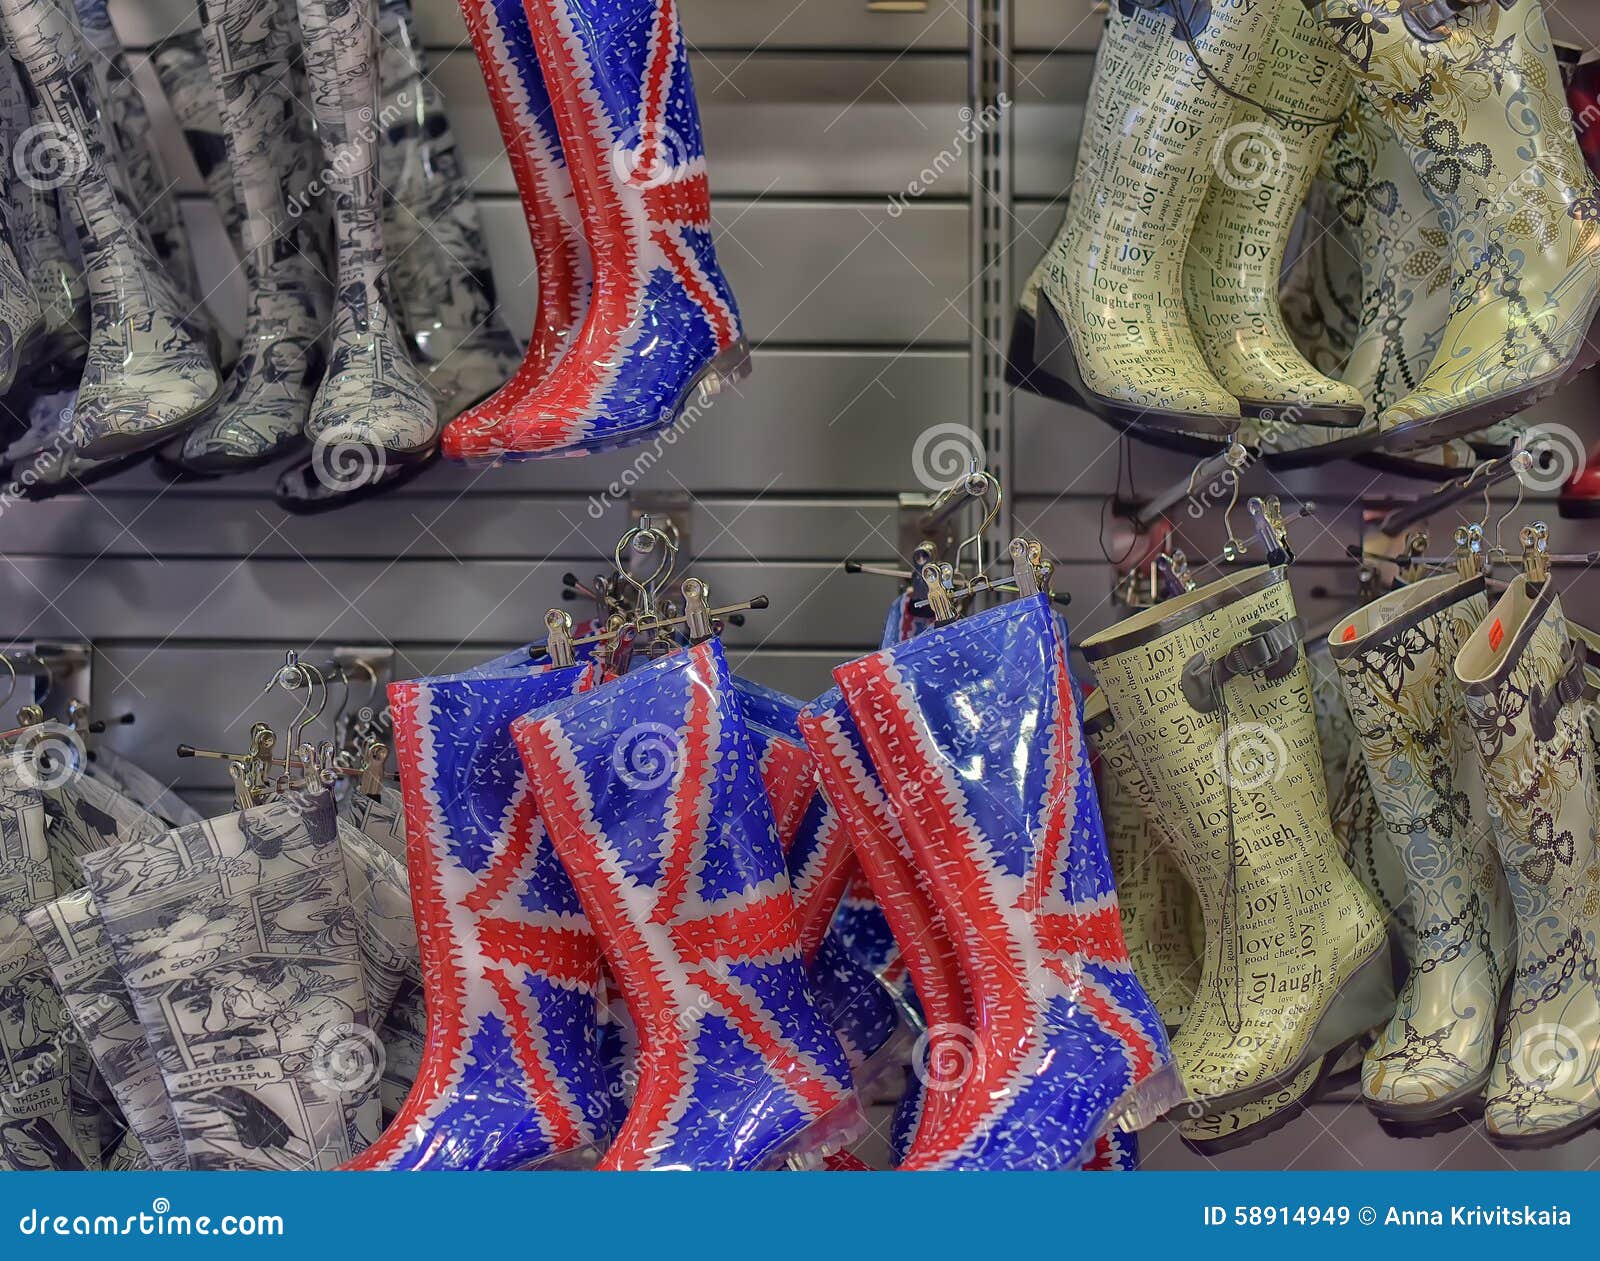 Rubber boots in the store editorial stock image. Image of clothing ...